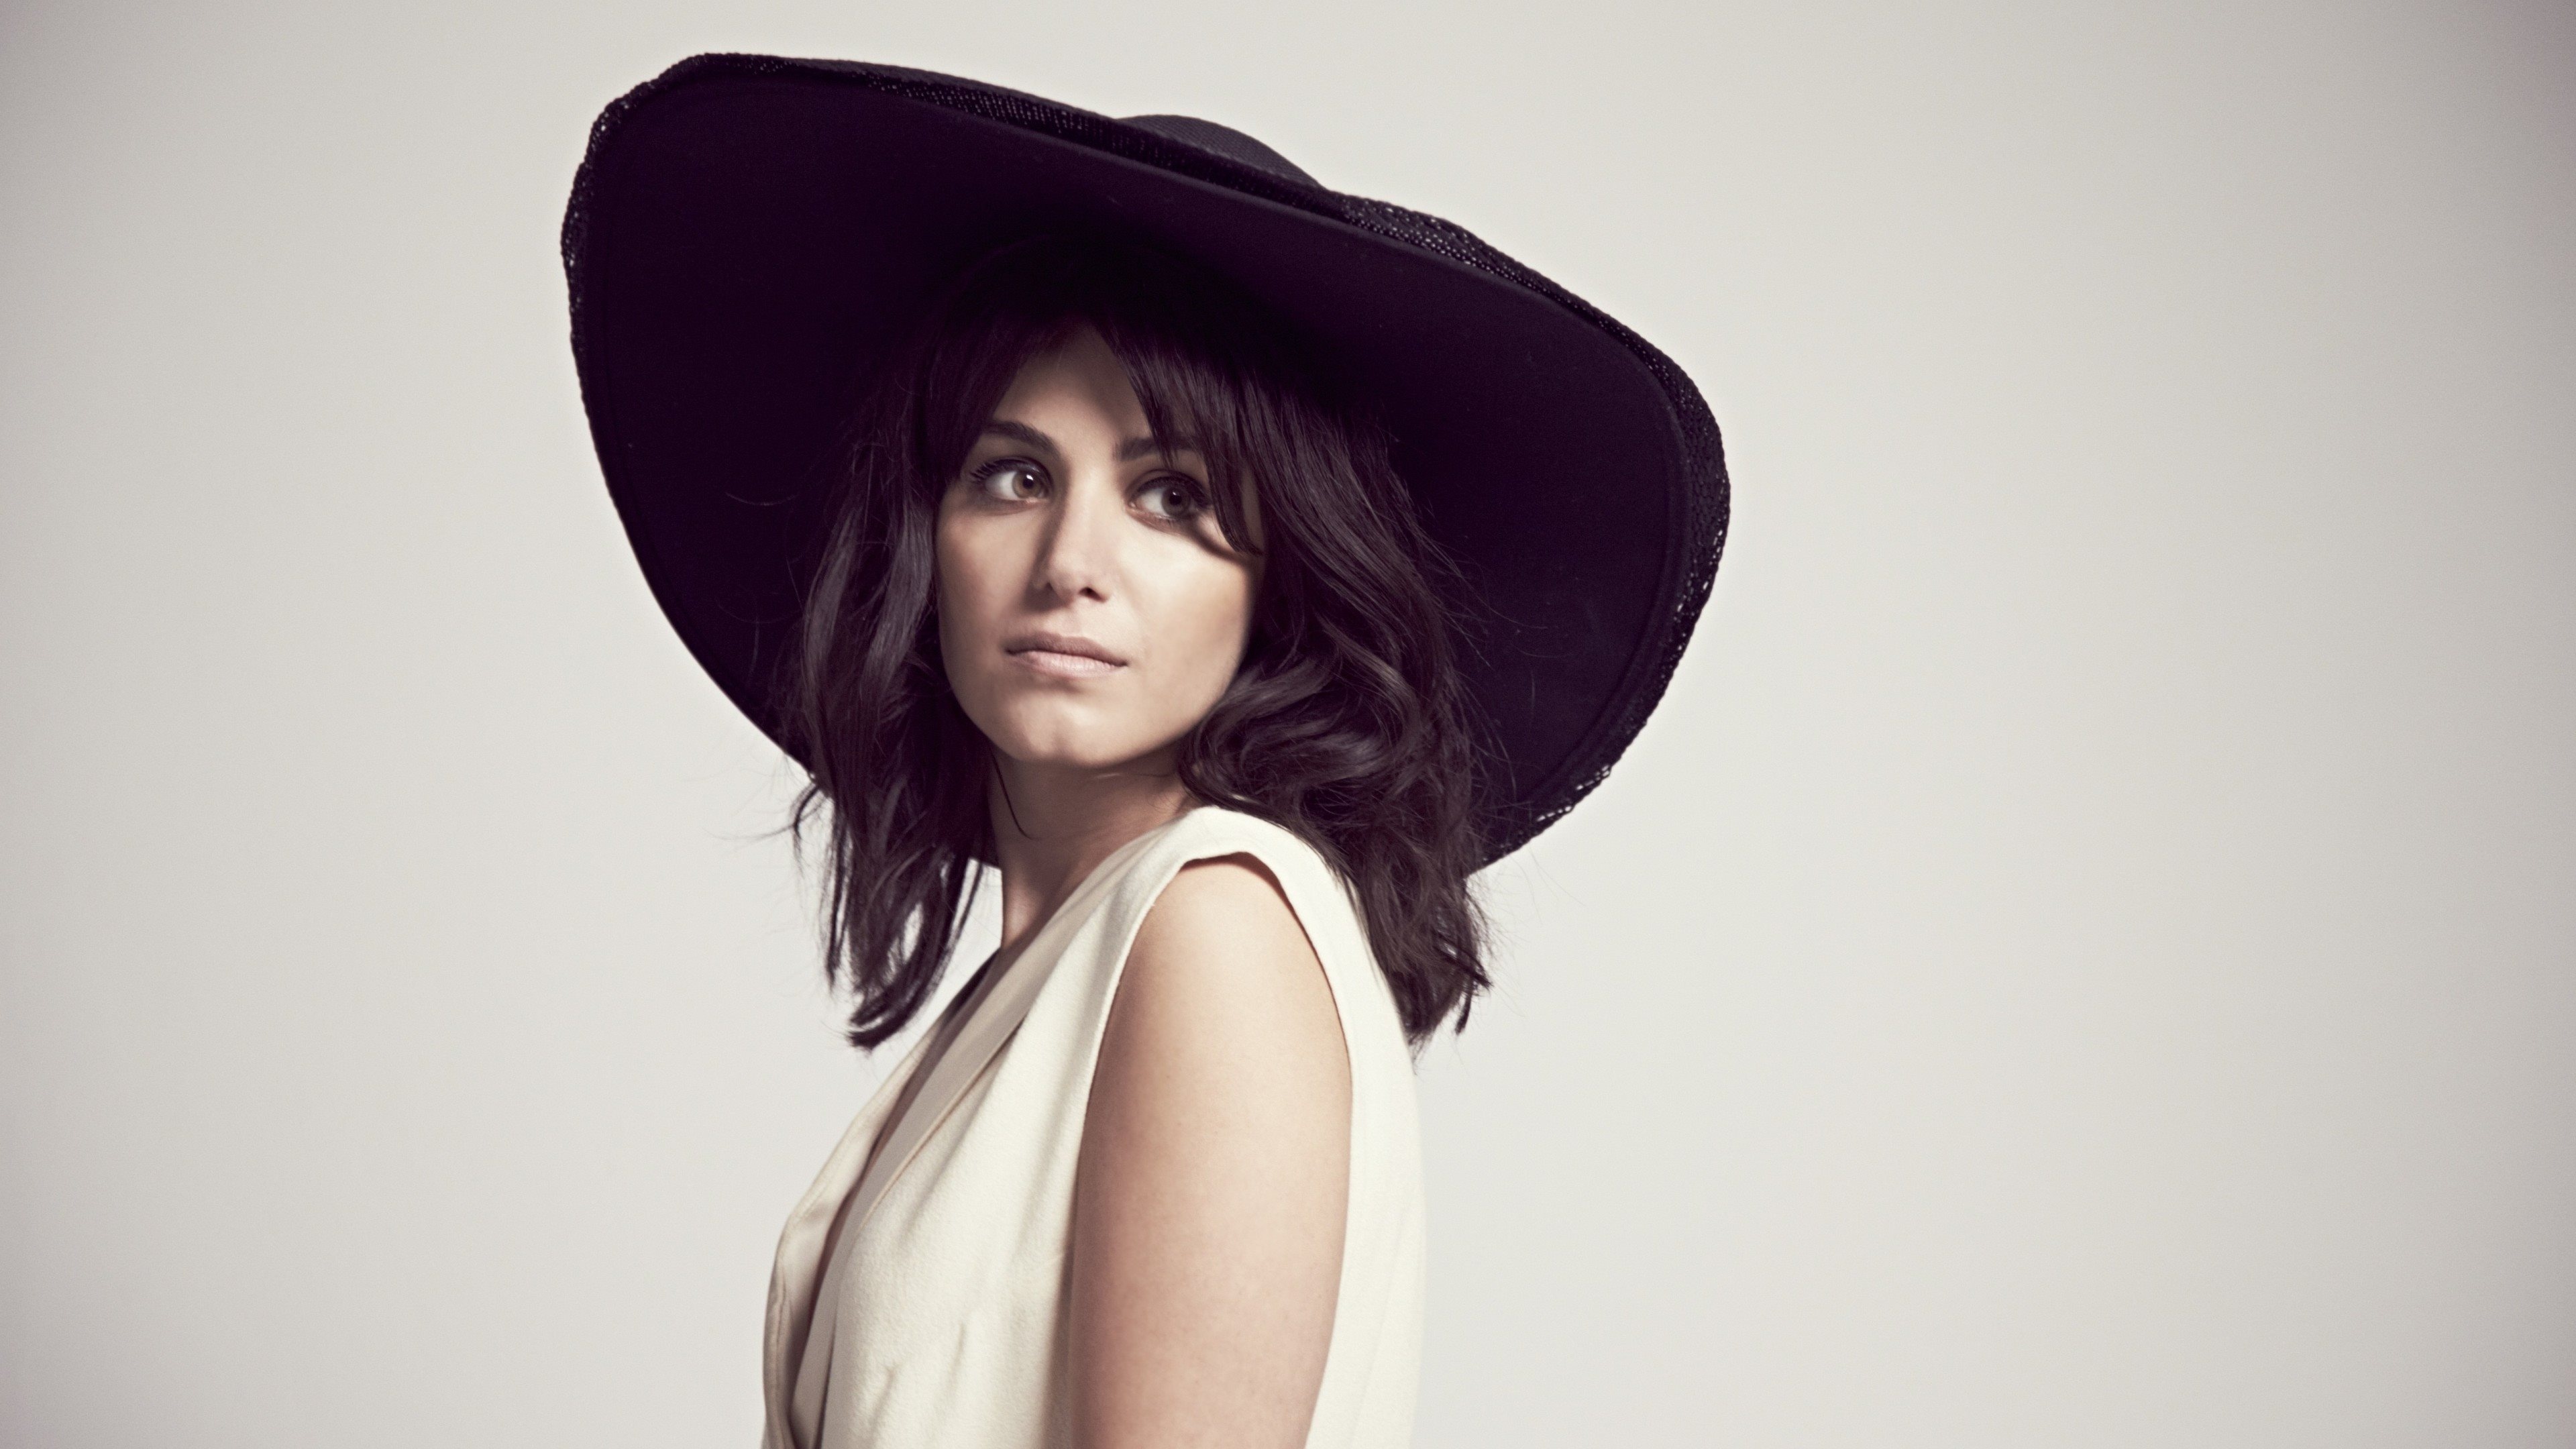 Download wallpapers Katie Melua, portrait, 4k, singer, beautiful woman, Georgian singer for desktop with resolution. High Quality HD pictures wallpapers 3840x2160